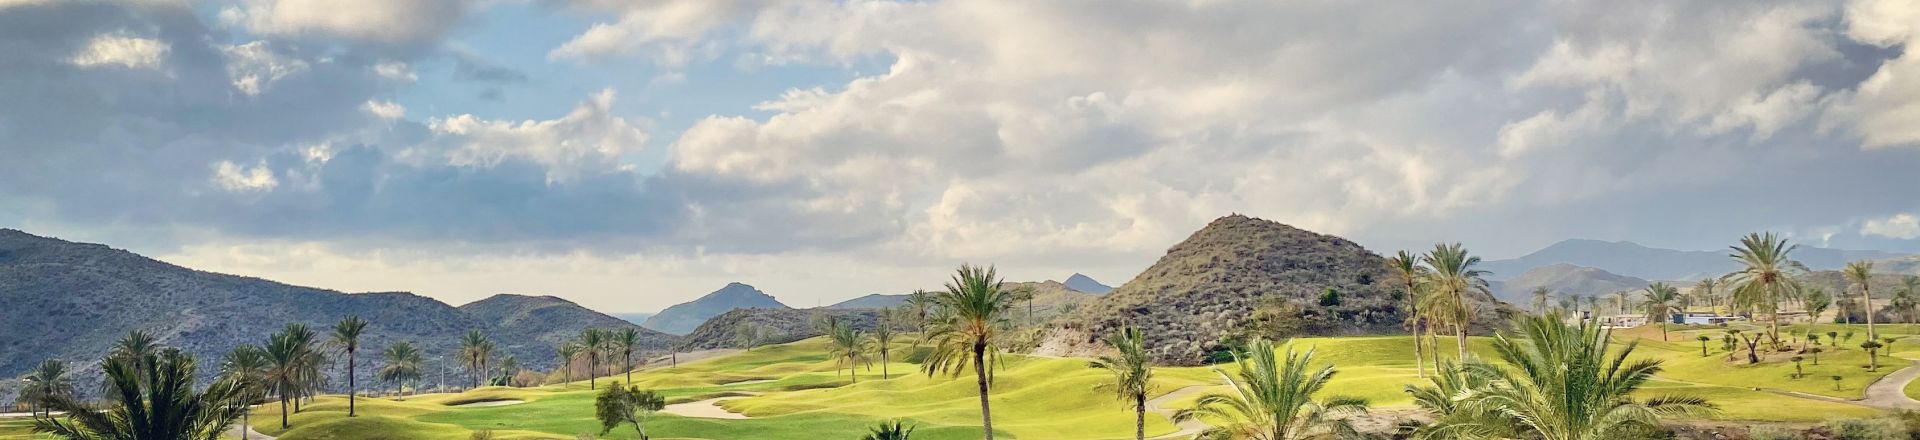 Aguilon Golf for Long stay golf holidays in Spain